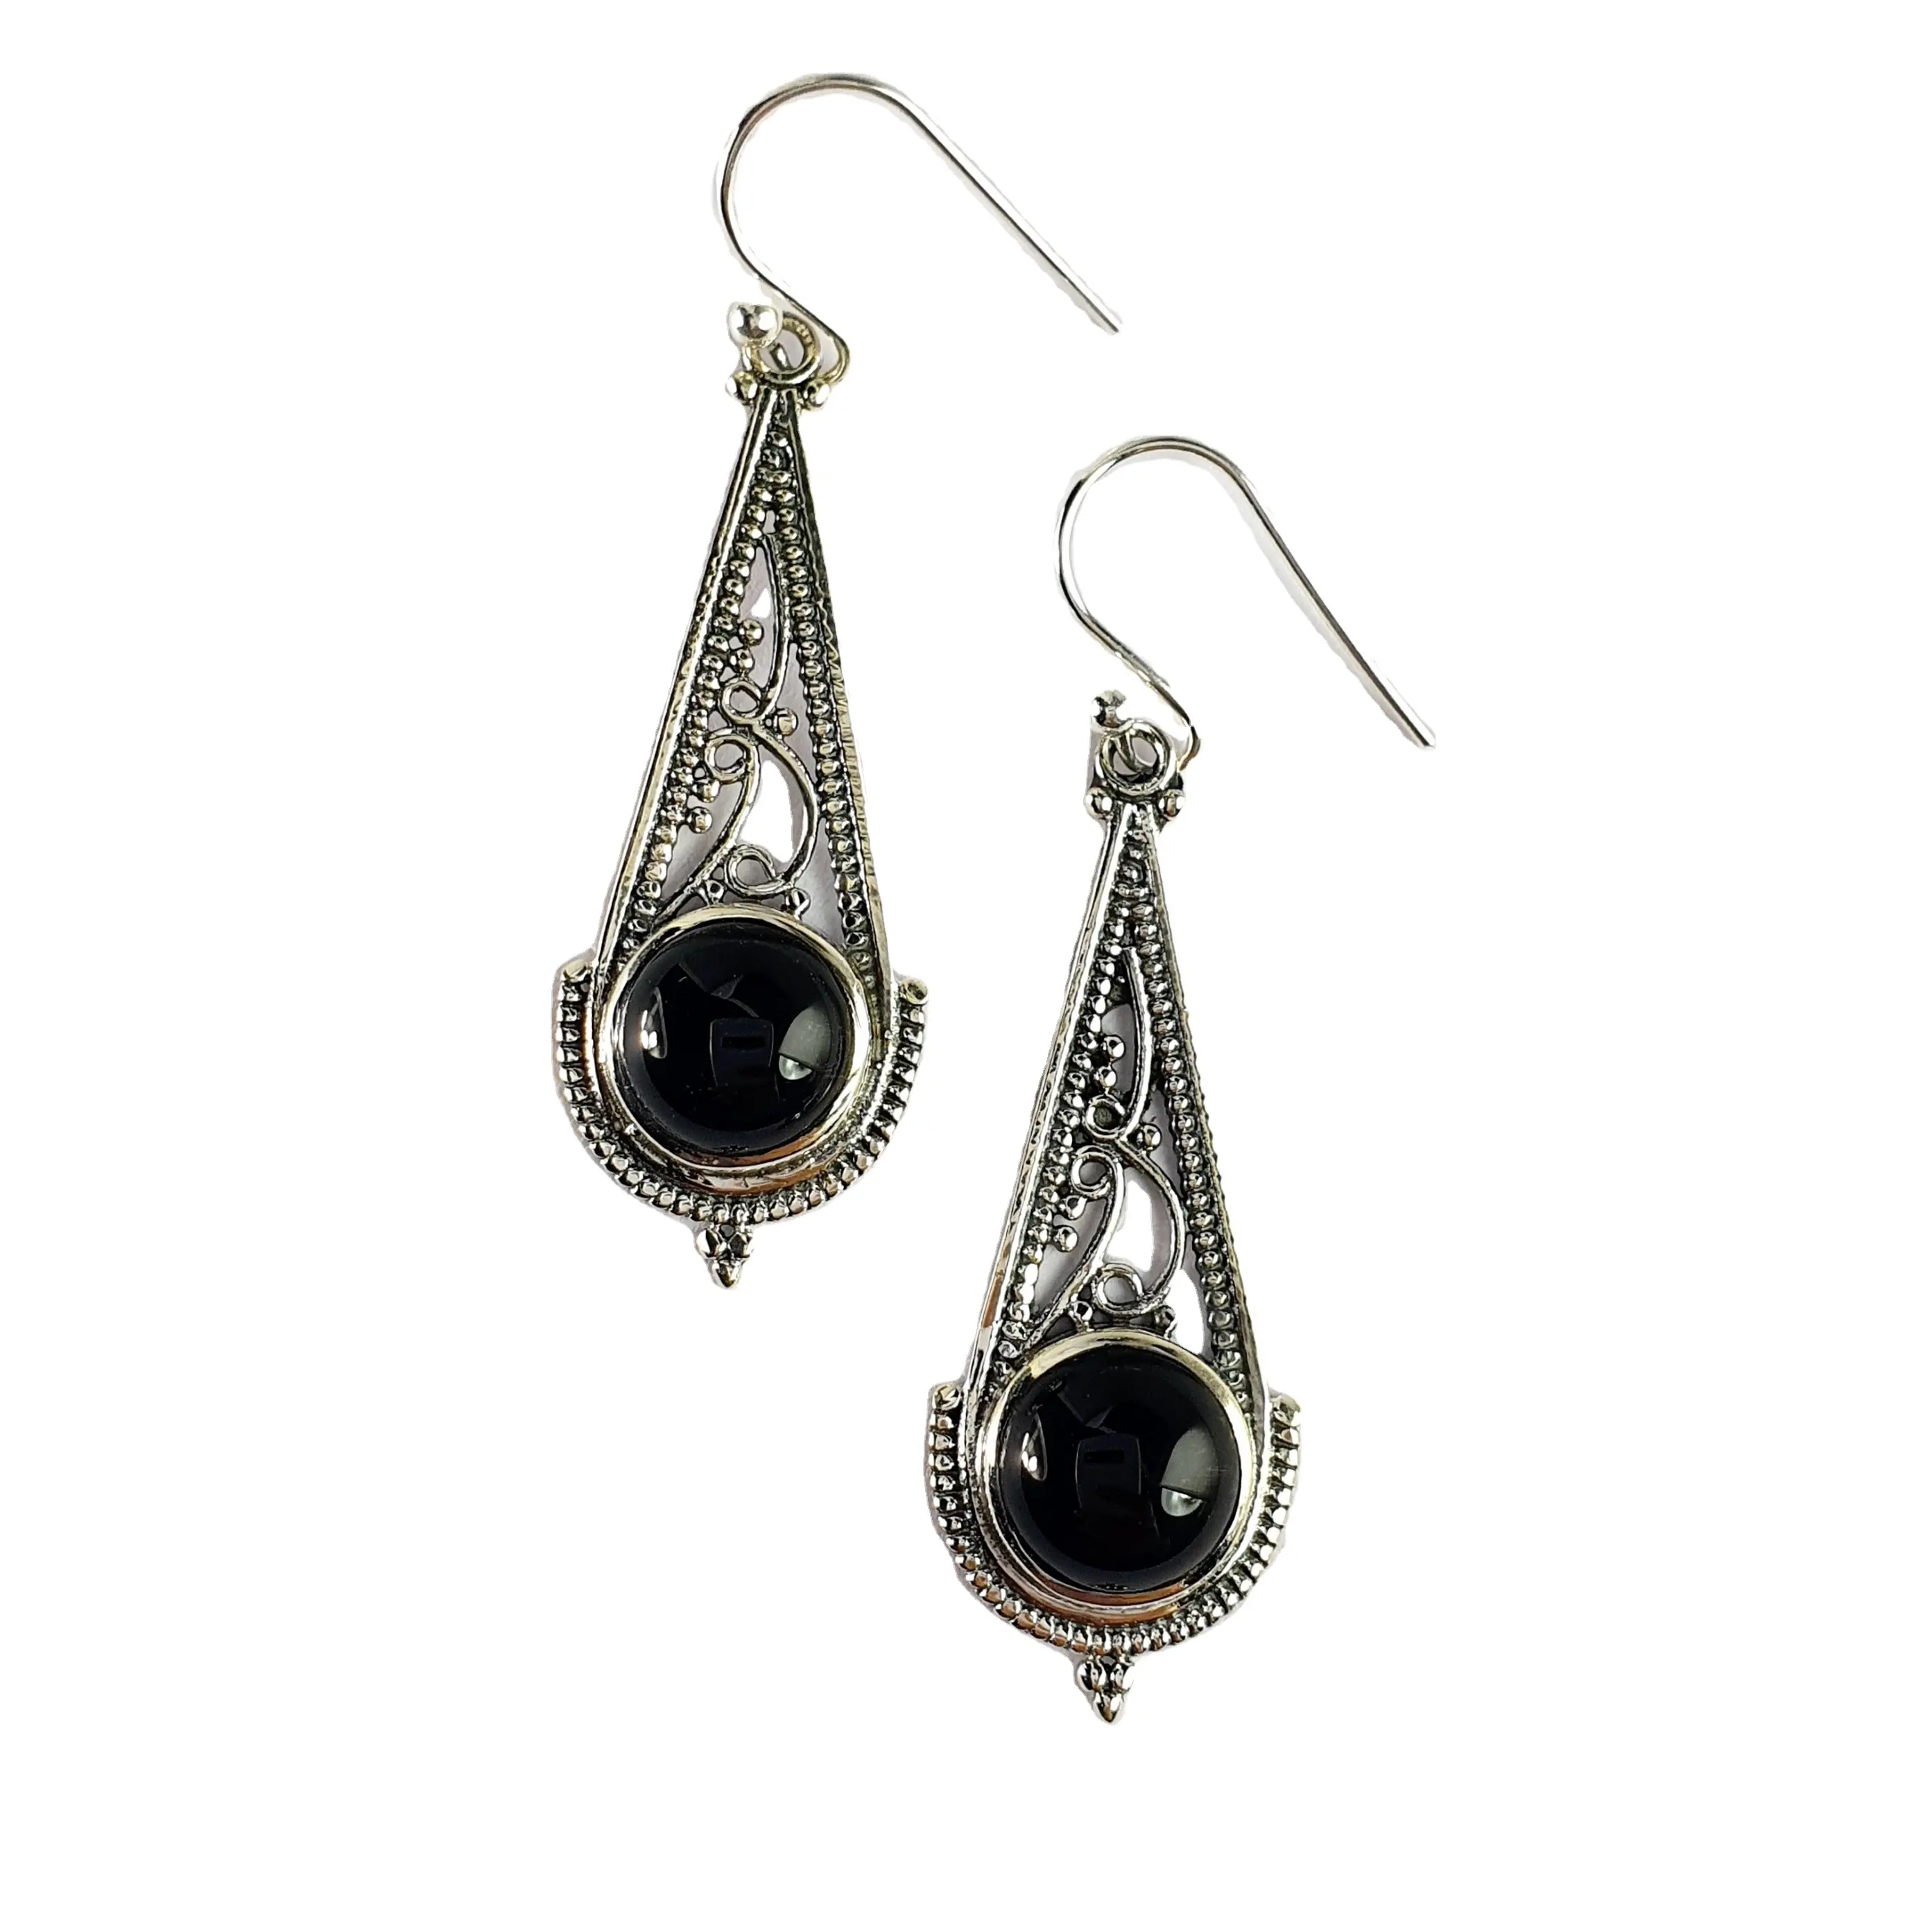 Quality Assured 925 Sterling Silver Black Onyx Gemstone Earrings Women's Fashionable Fine Jewelry Manufacturer From India